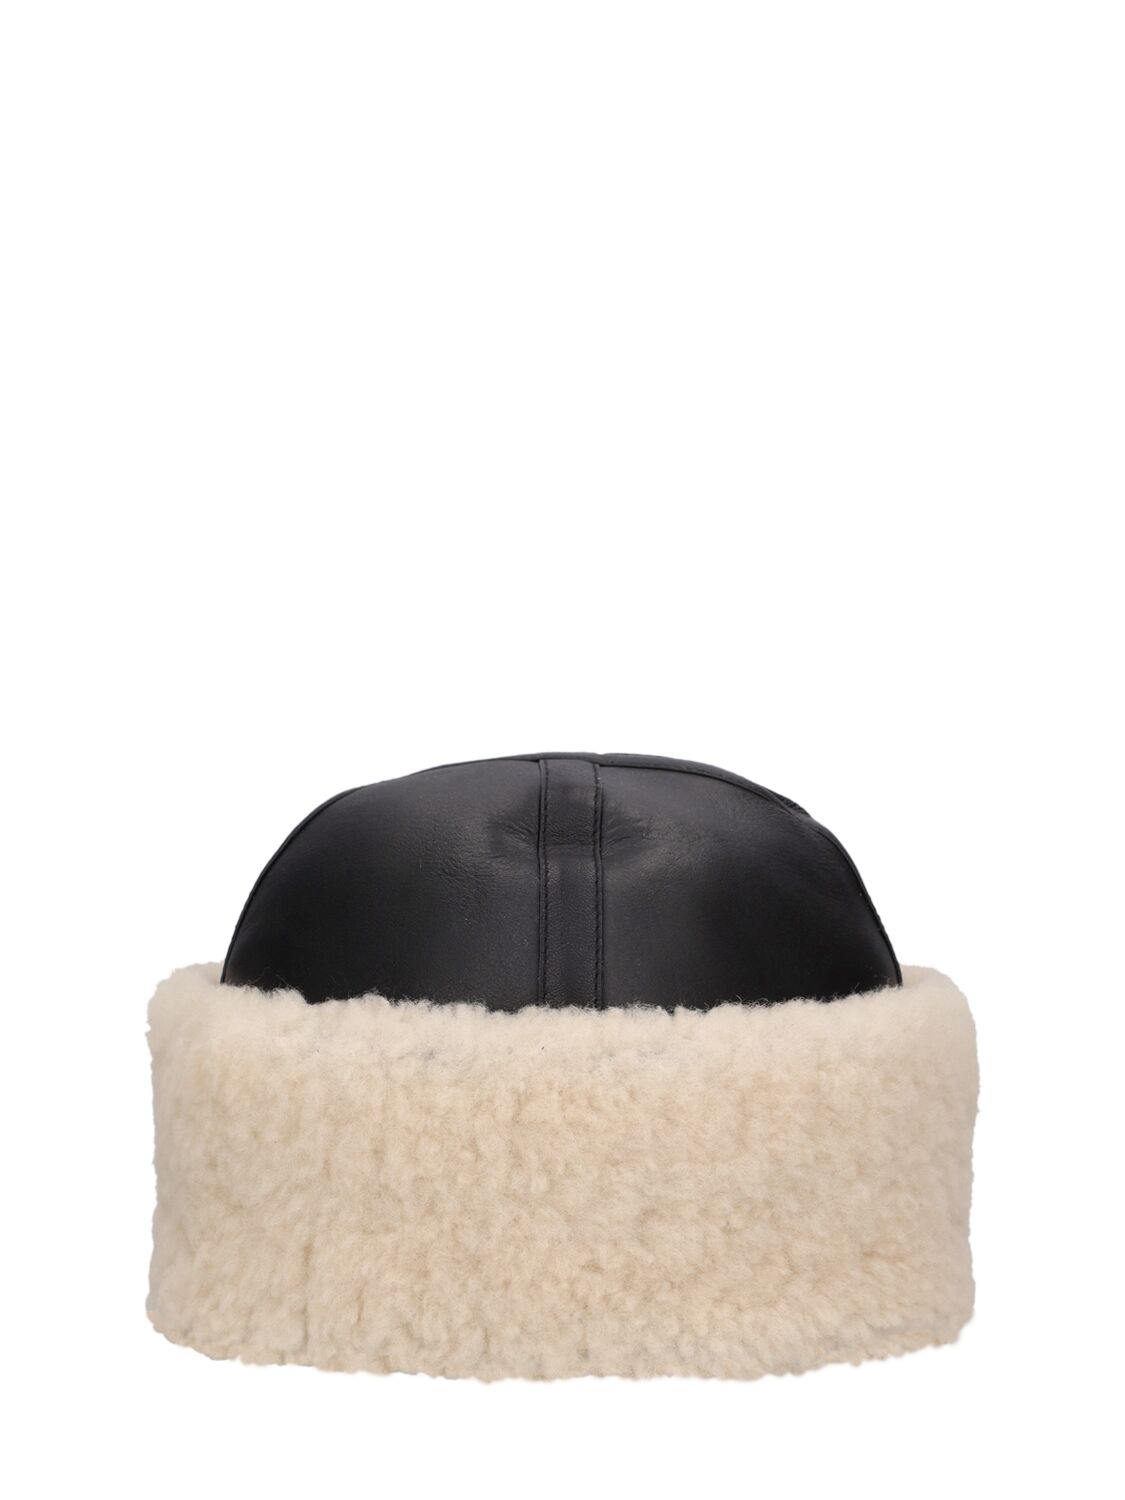 Image of Shearling Winter Hat